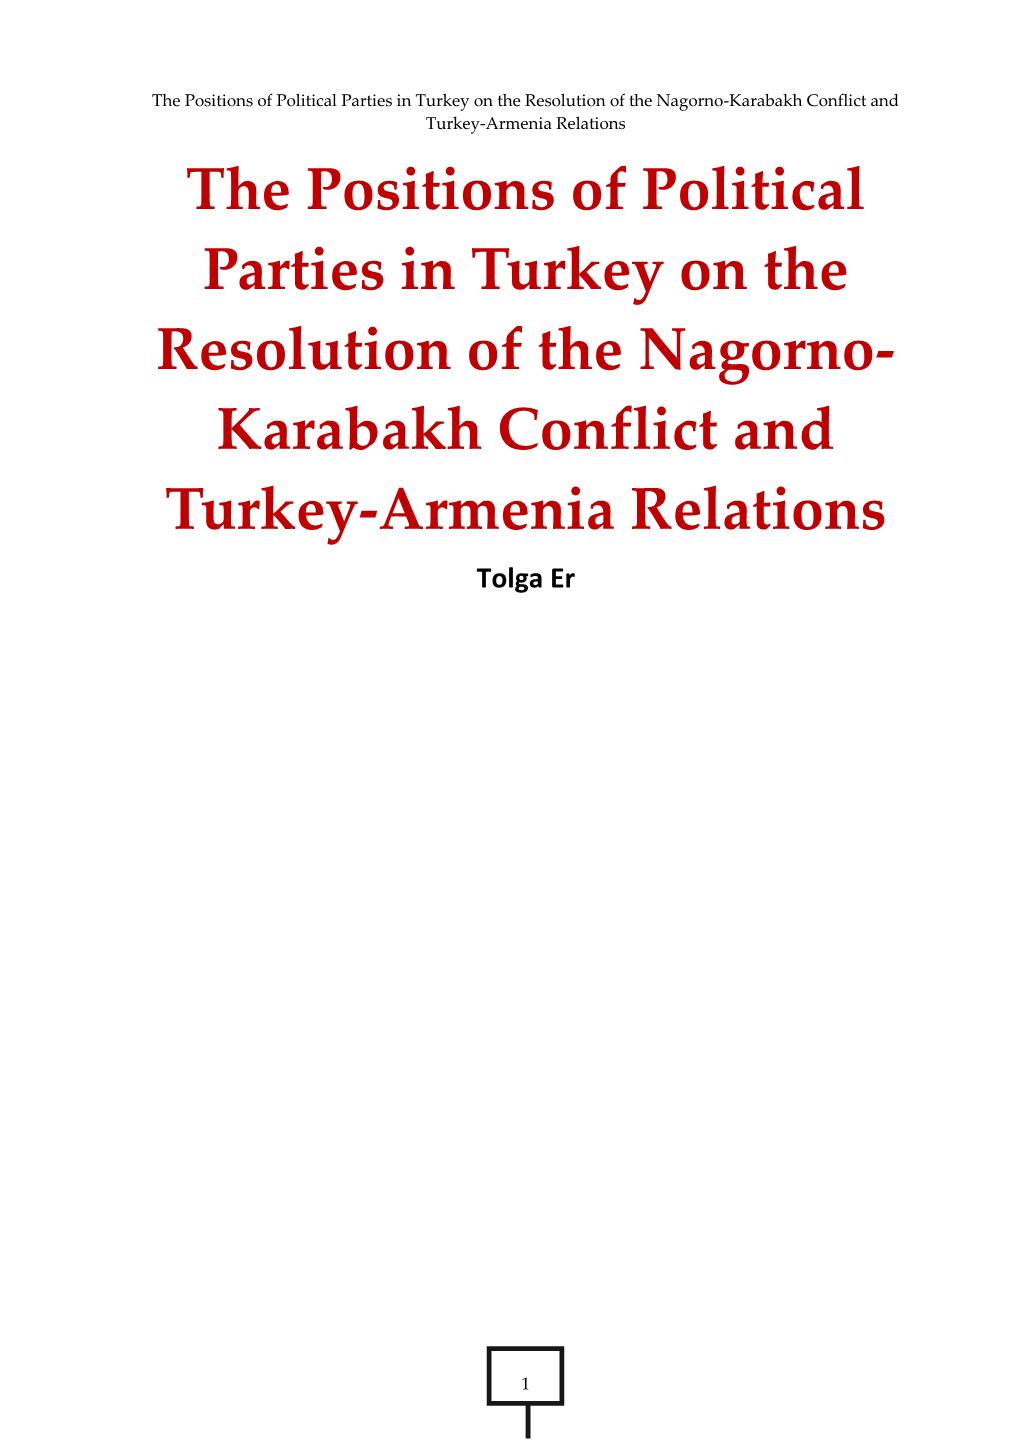 The Positions of Political Parties in Turkey on the Resolution of the Nagorno-Karabakh Conflict and Turkey-Armenia Relations